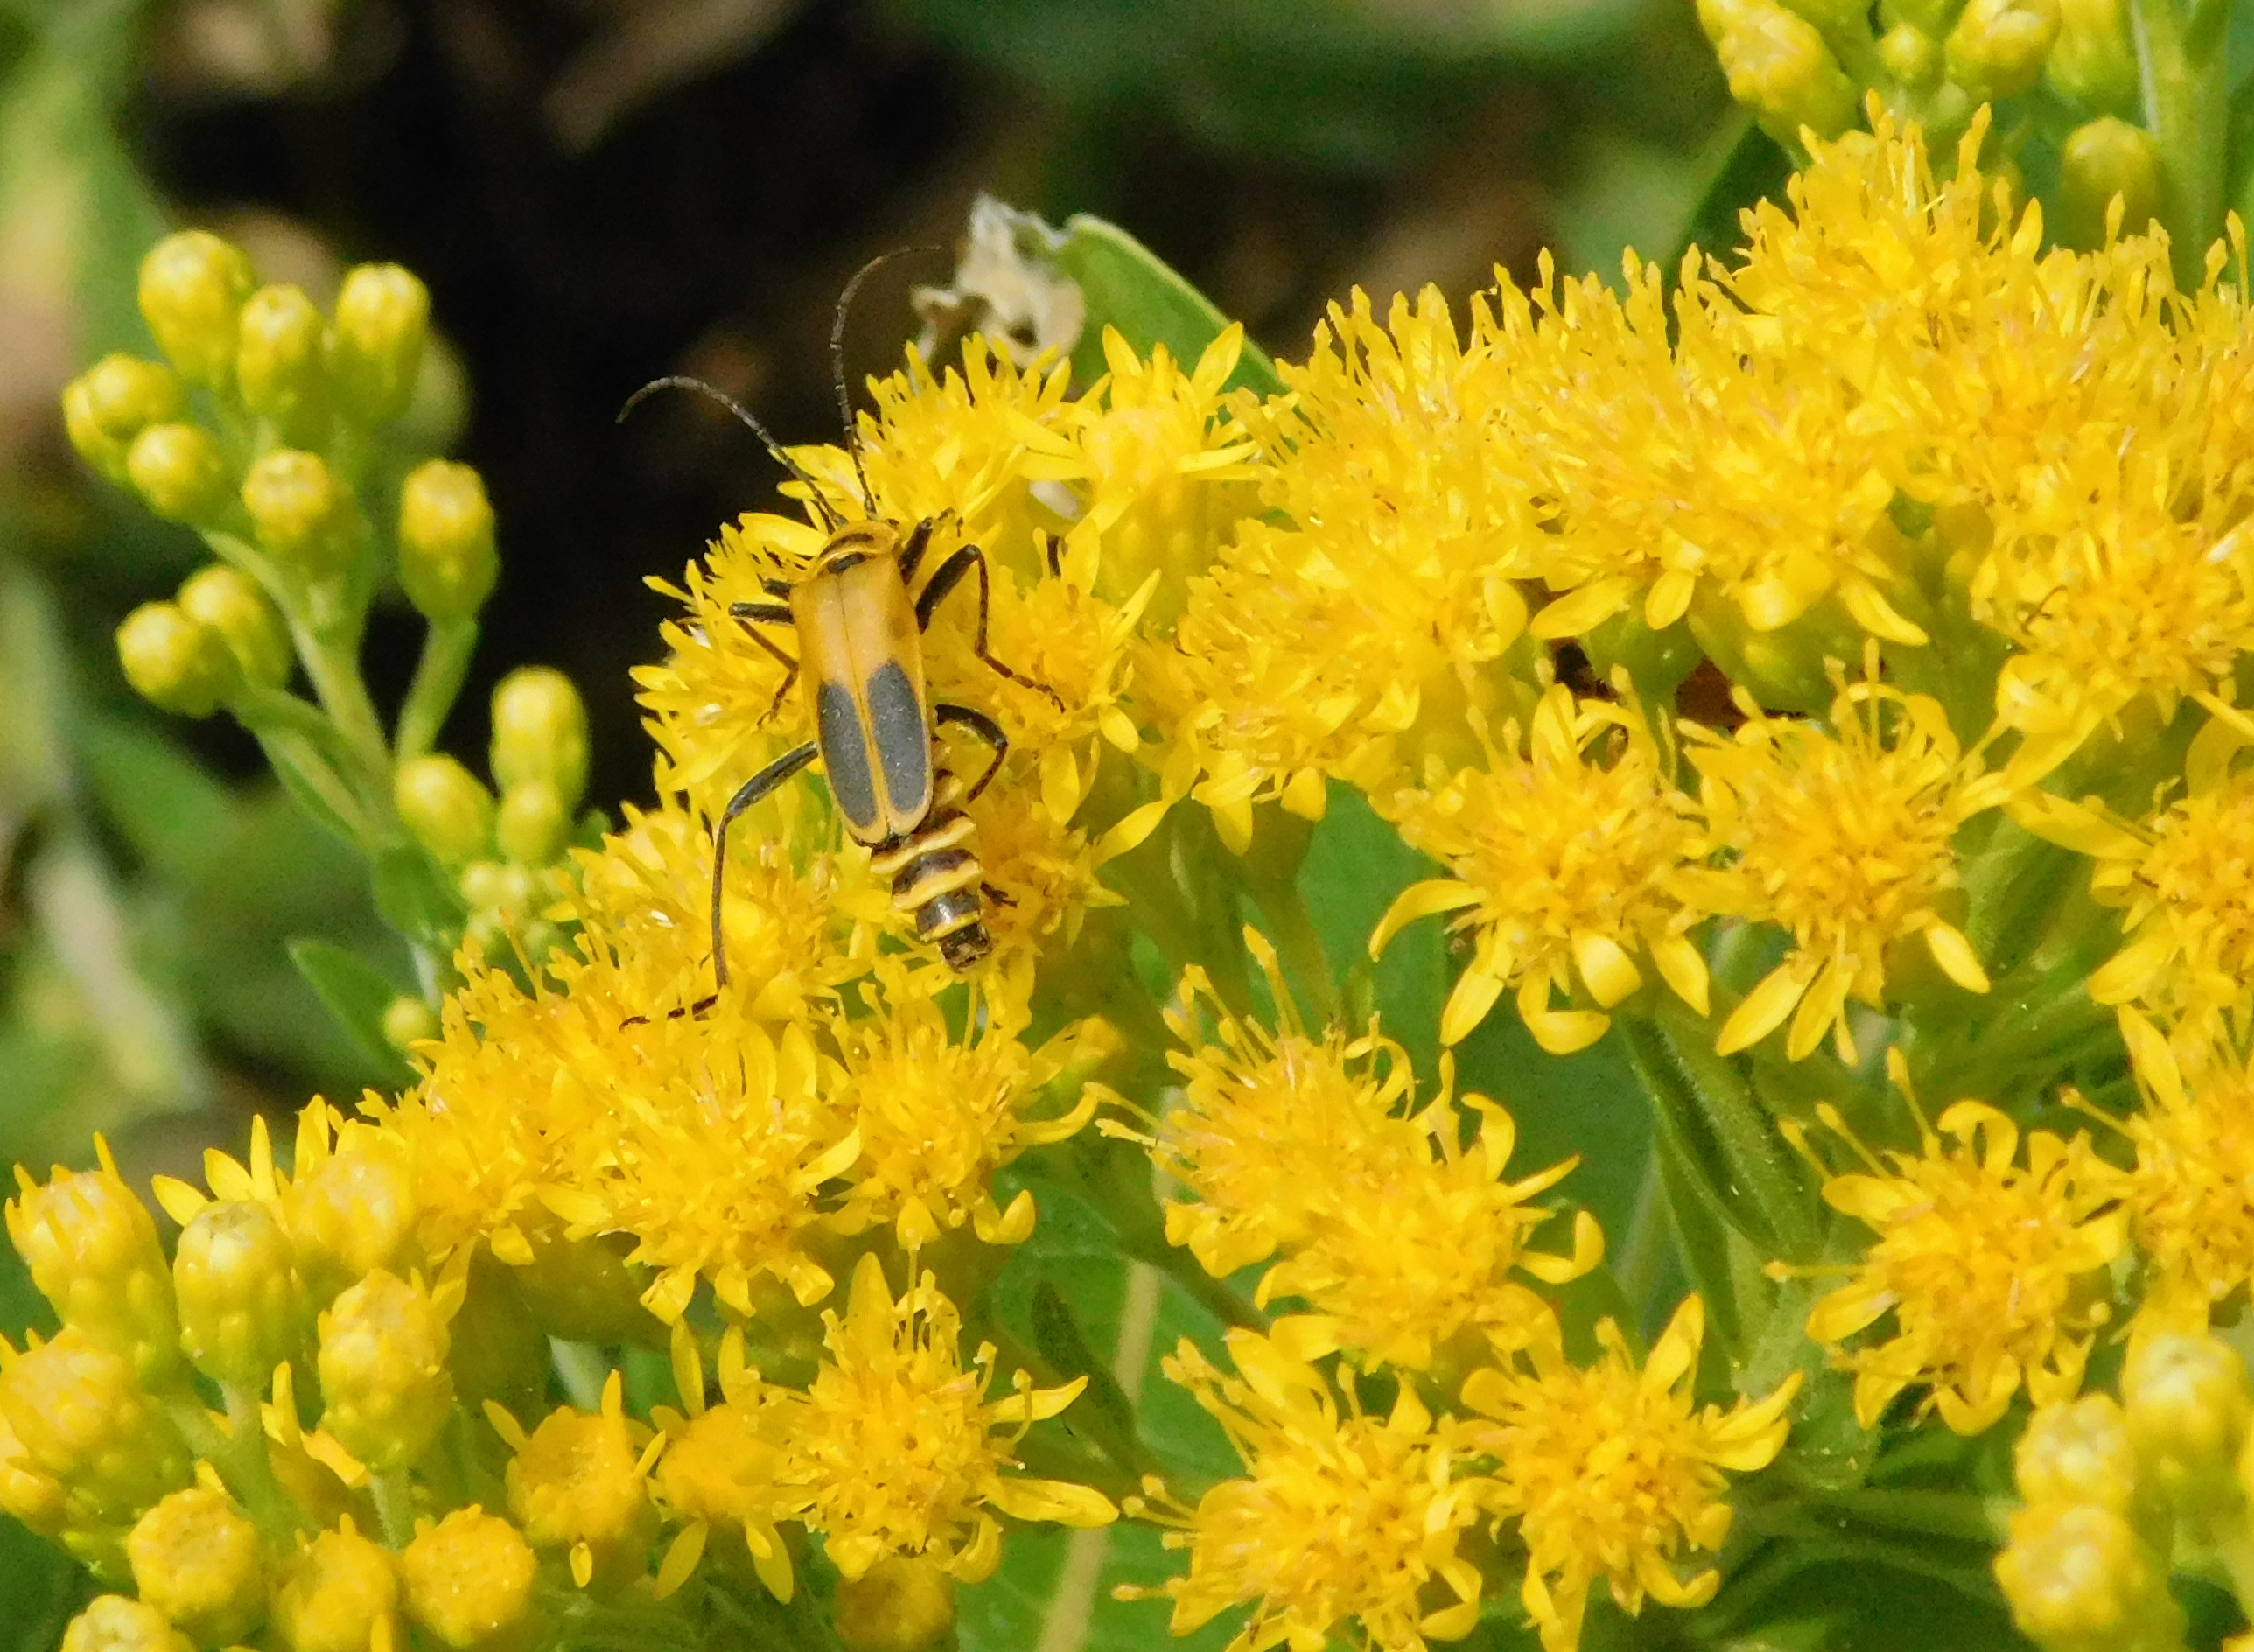 Goldenrod soldier beetle on yellow goldenrod flowers